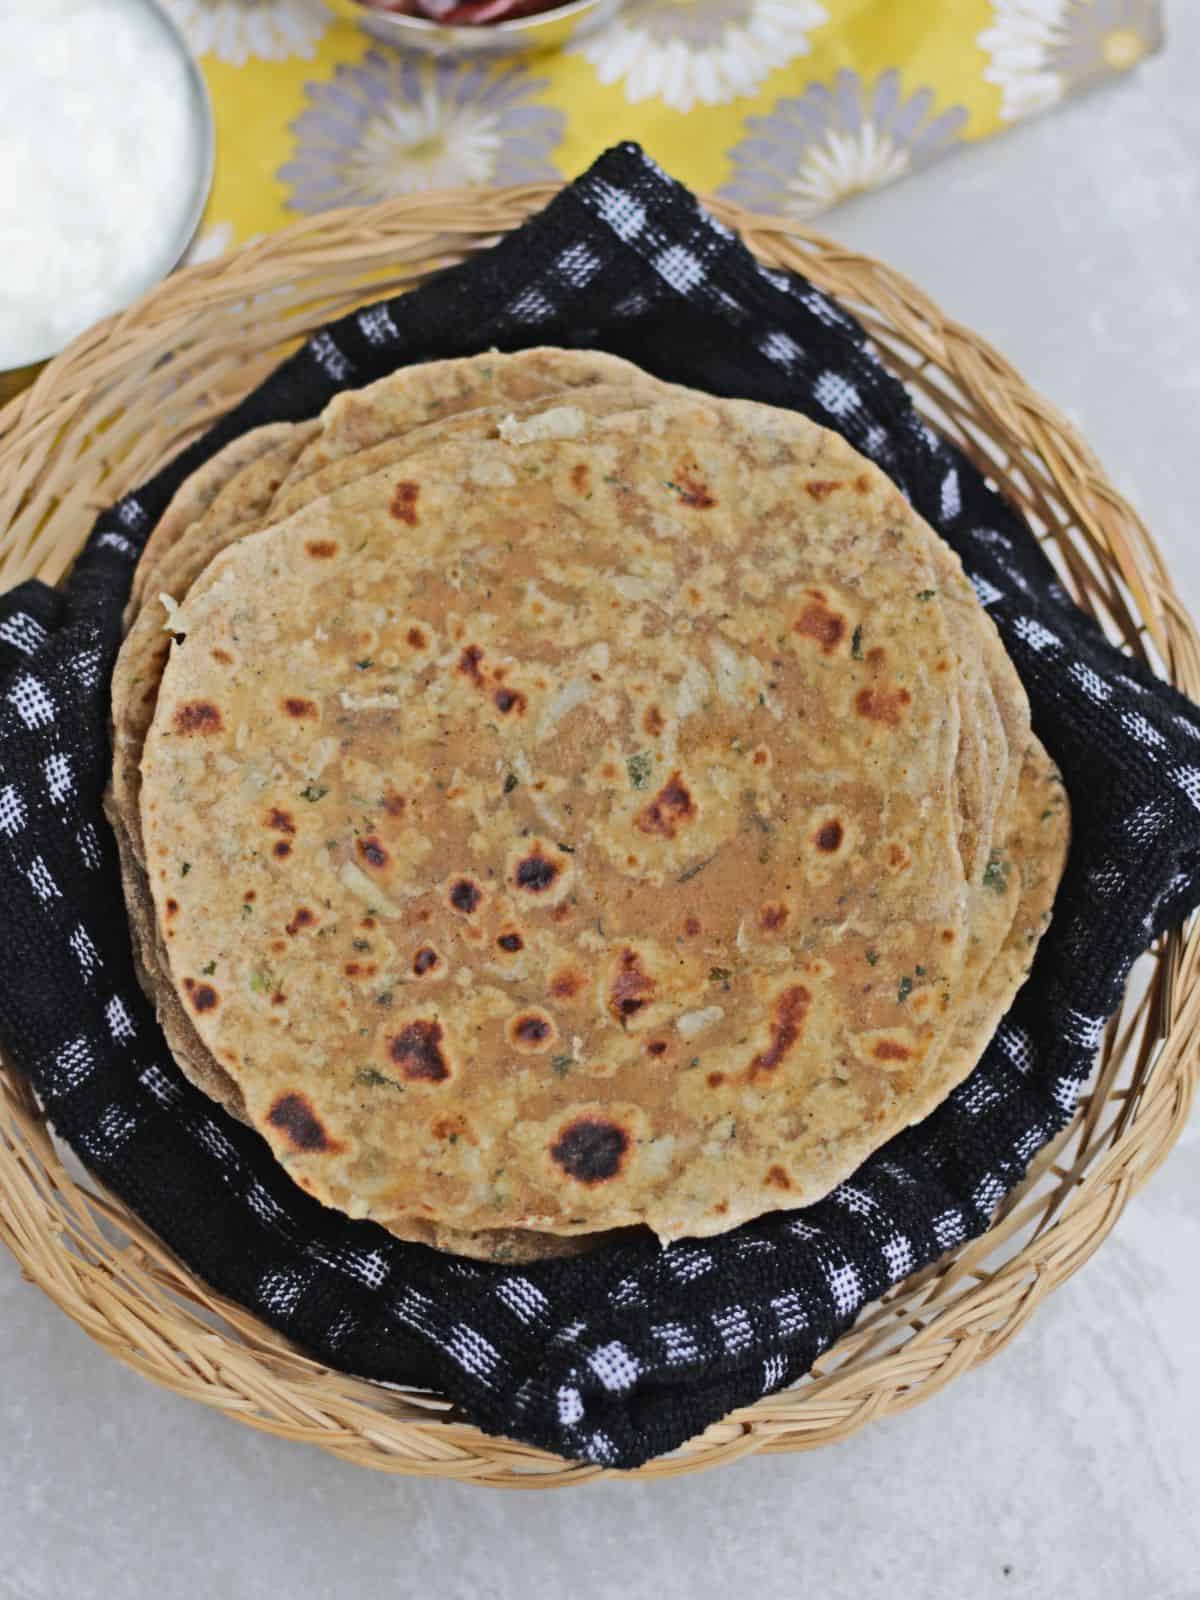 top view of radish paratha in a basket lined with black cloth.